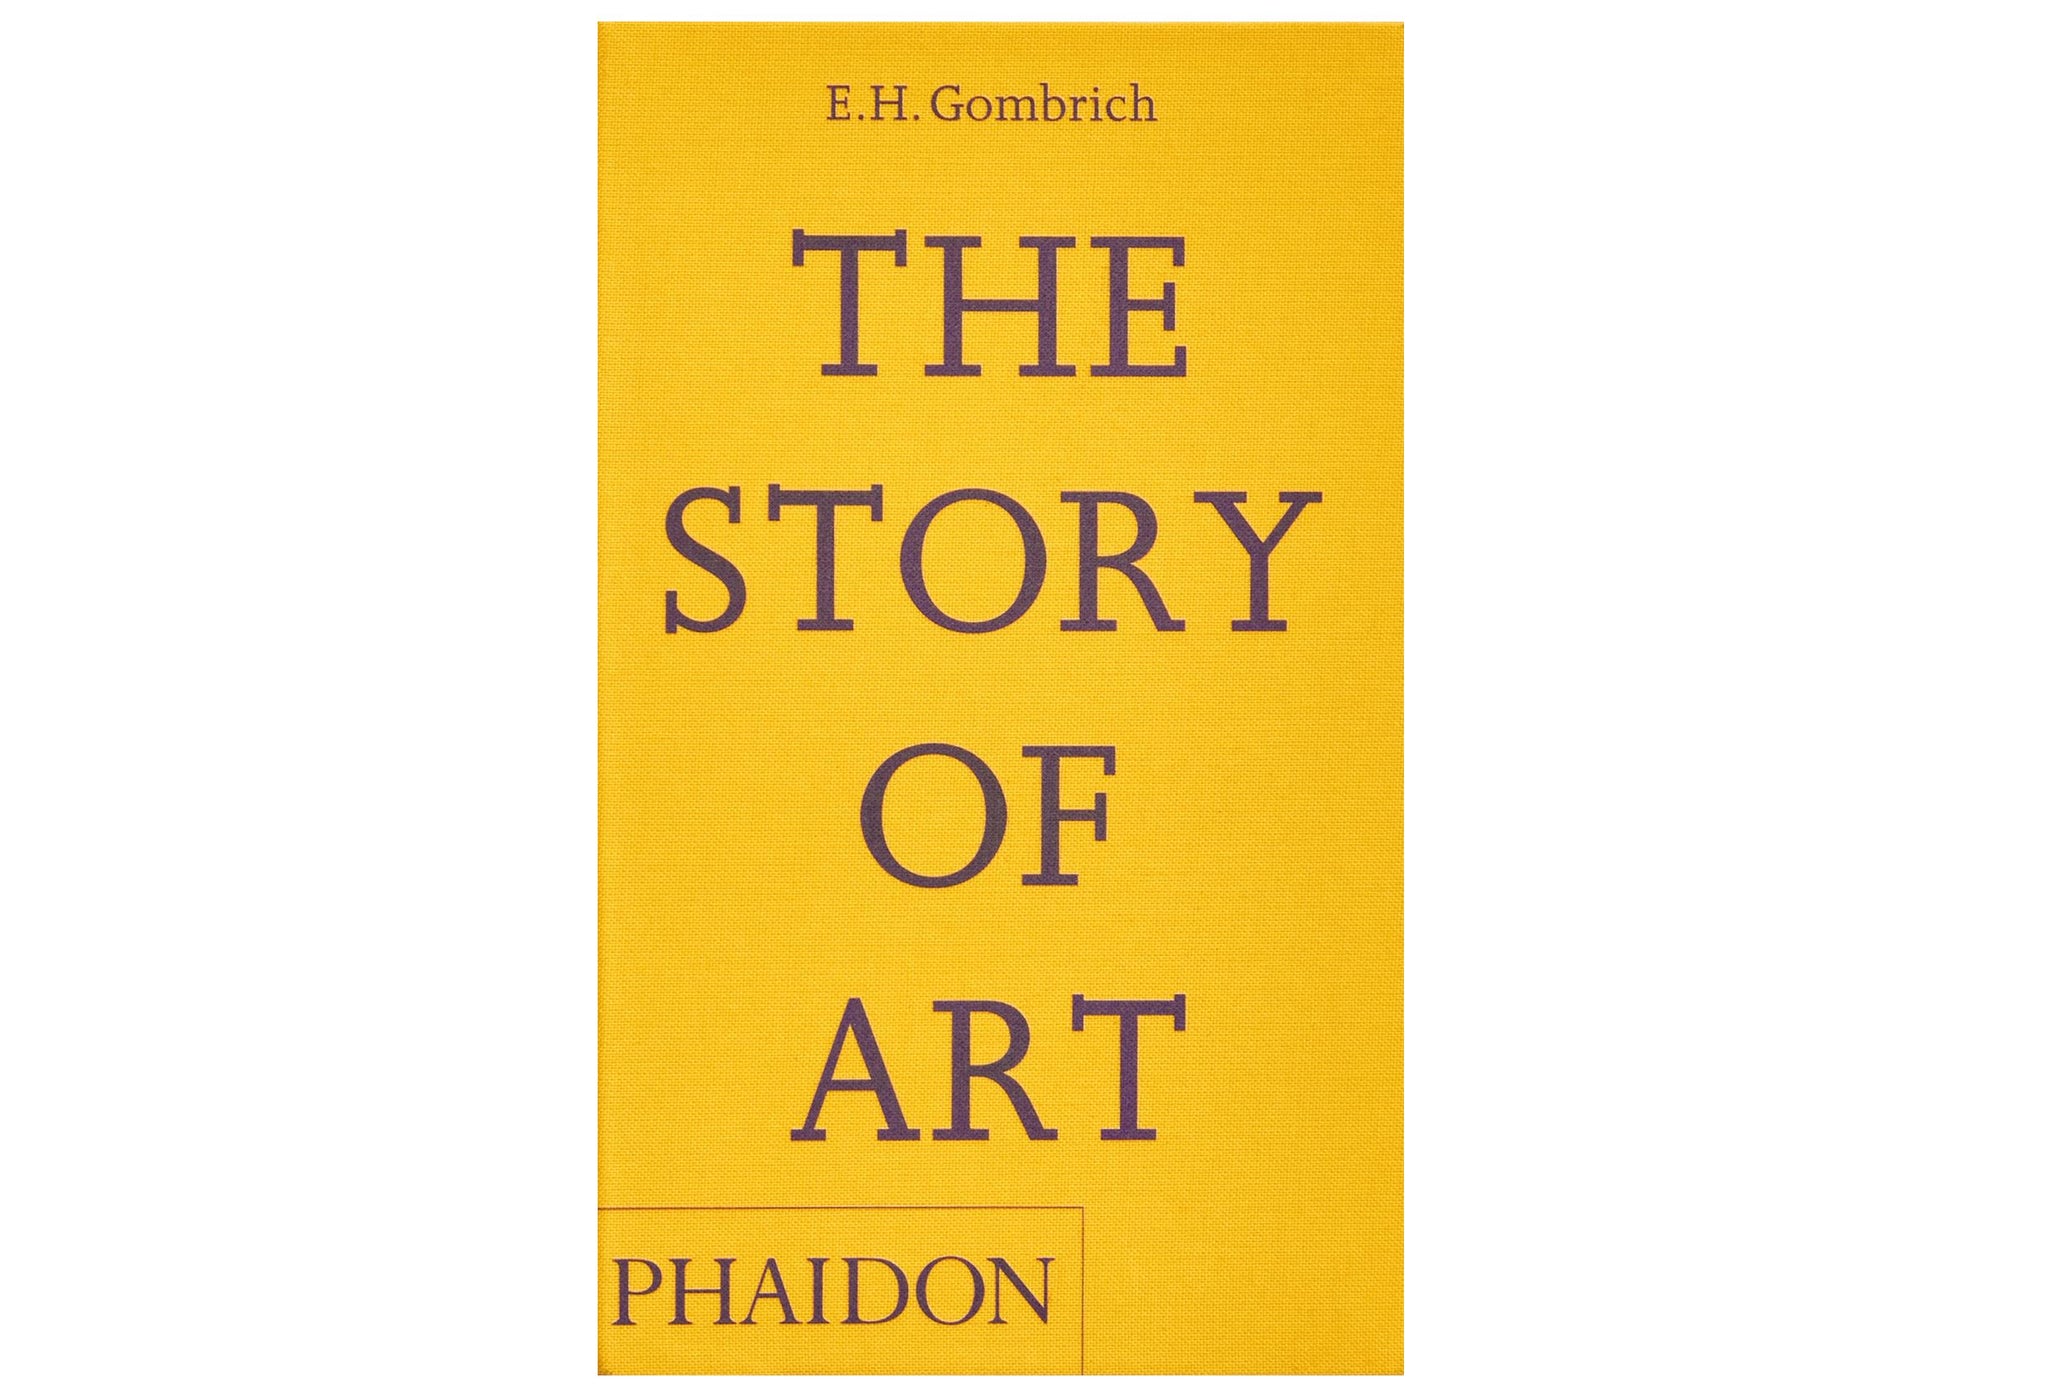 Story Of Art - E.H. Gombrich - Third Drawer Down